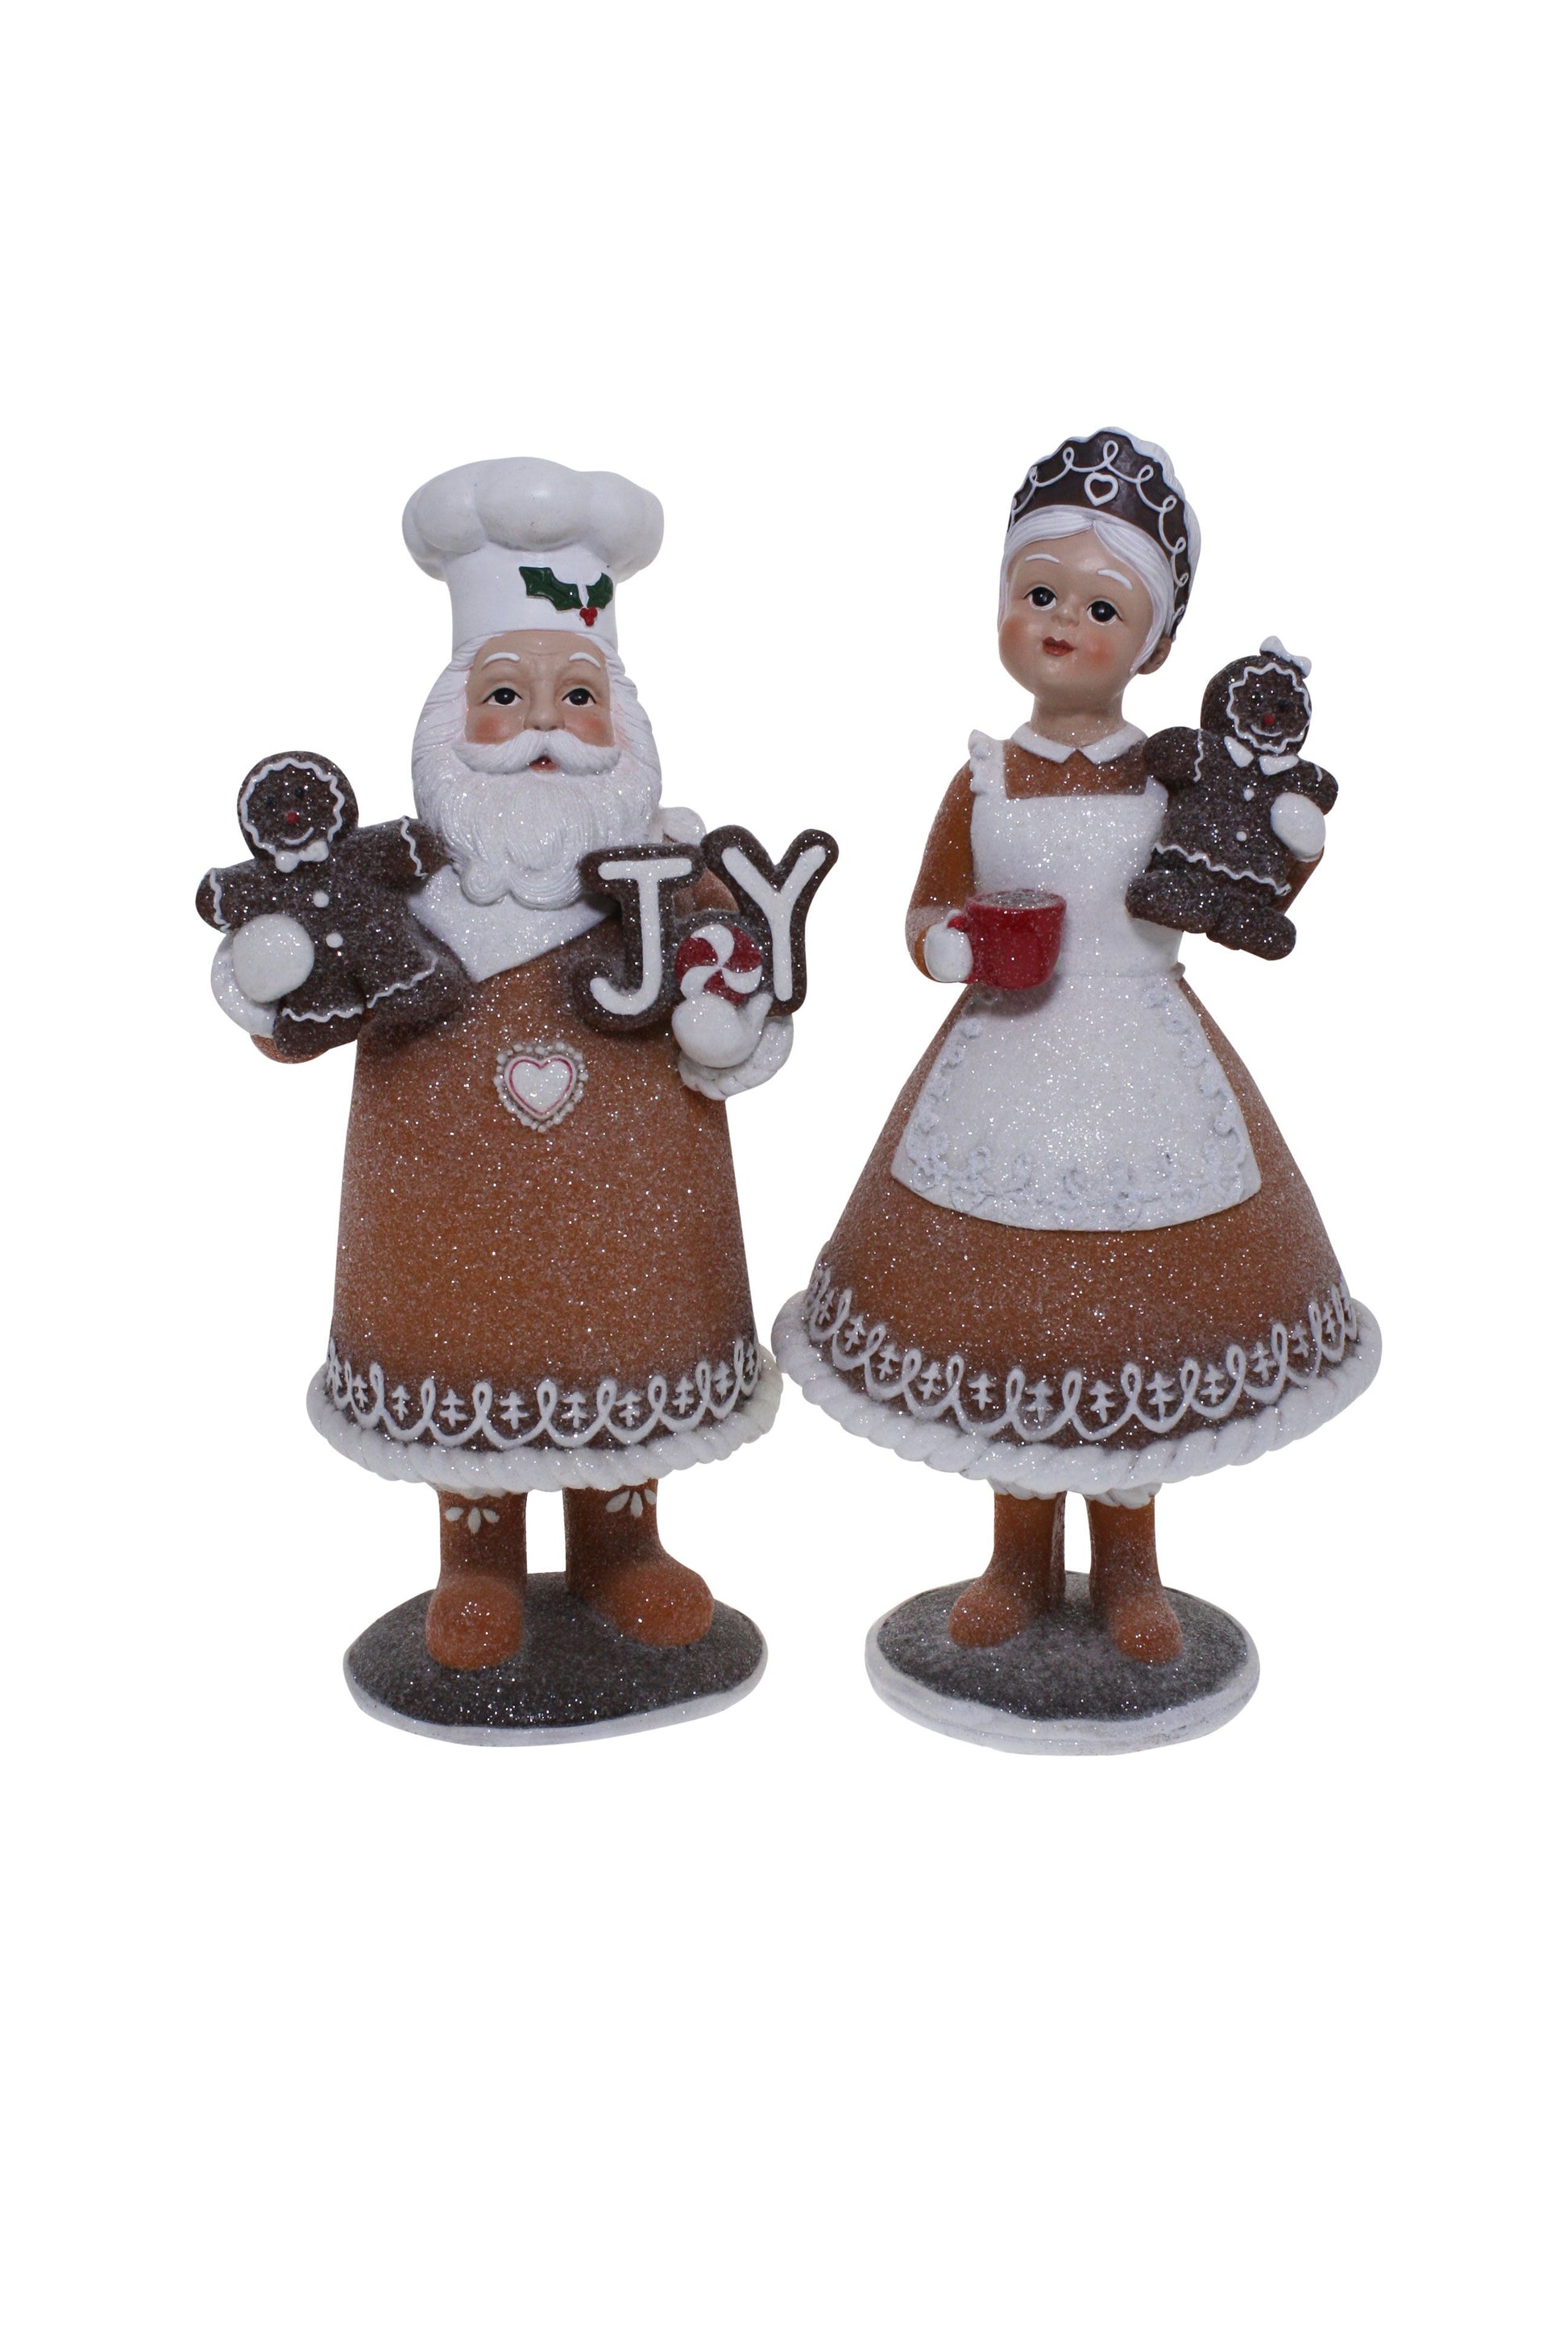 28cm Gingerbread Mr and Mrs Claus Decorations